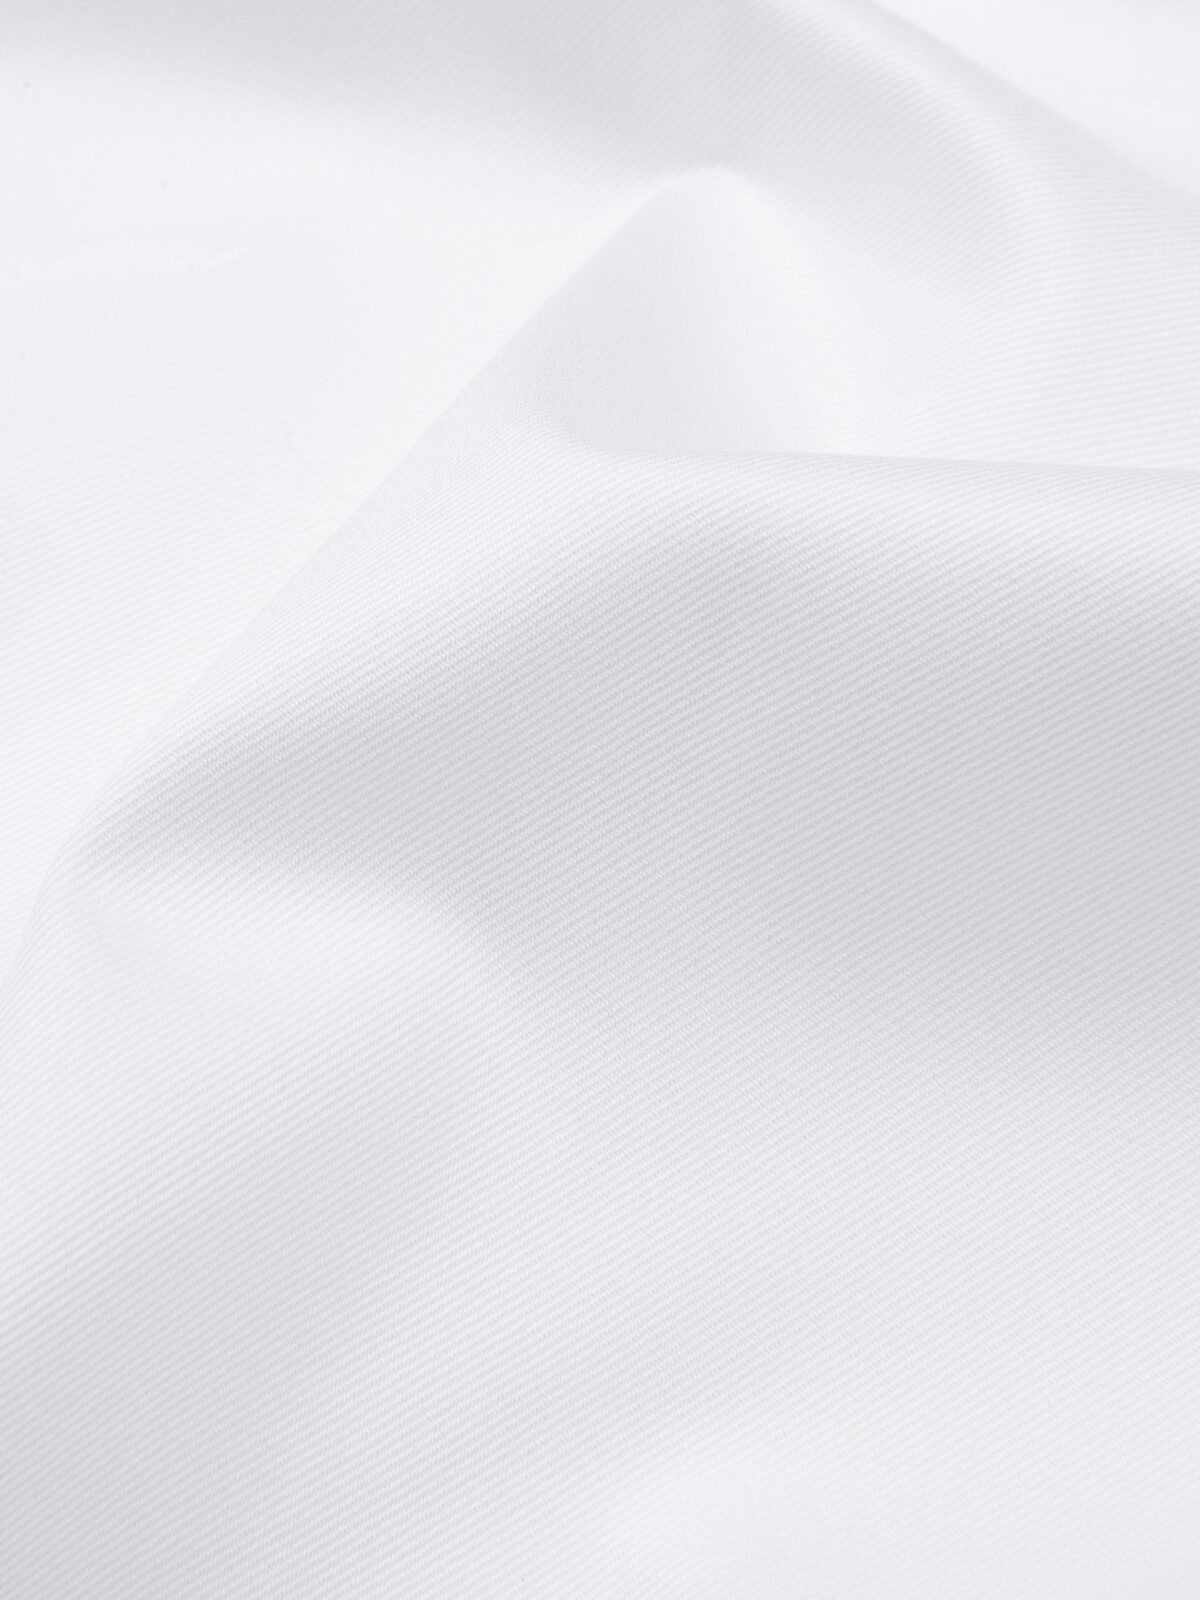 Mayfair Wrinkle-Resistant White Twill Shirts by Proper Cloth